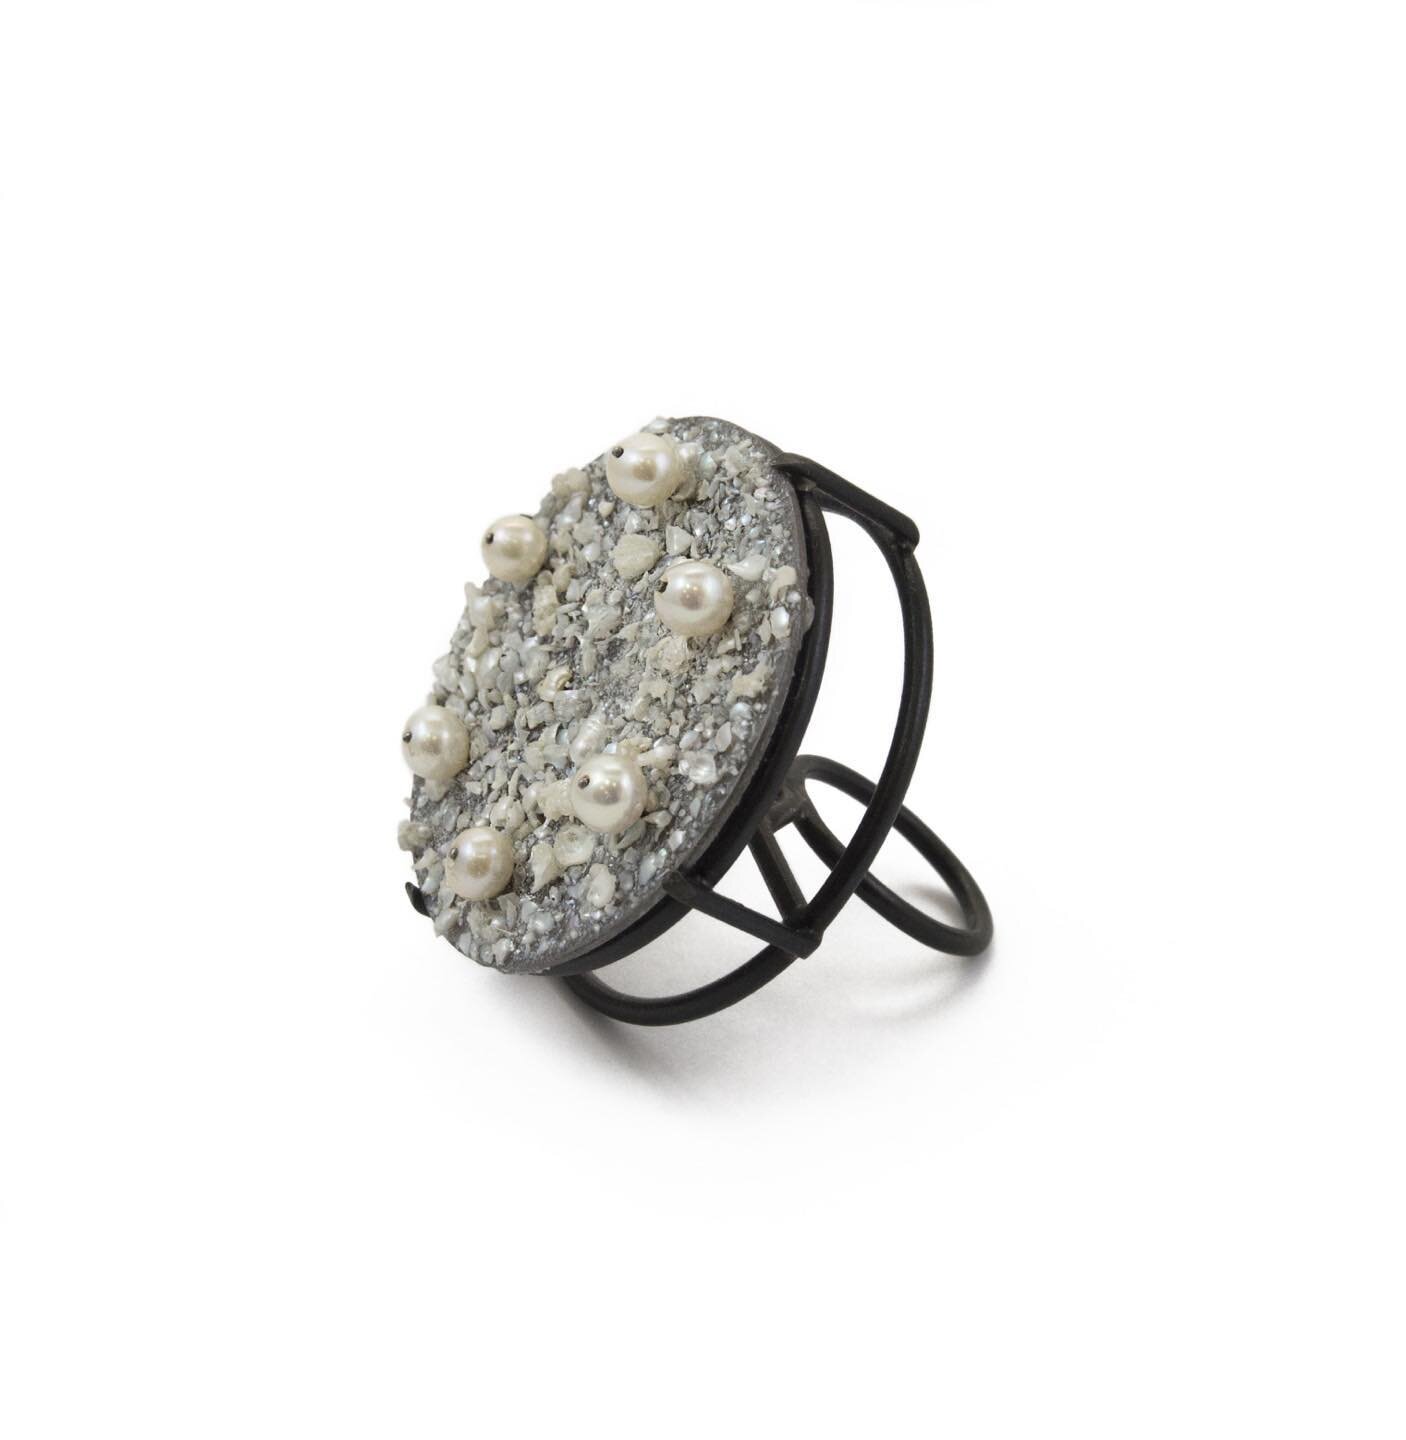 This pearl cocktail ring is an oldie but a goodie! It is made from mild steel and cultured pearls. Available on my website! 
-
-
-

#instajewelry #handmadejewlery #handmadecrafts #bespokejewelry #mainemade #madeinmaine #shopsmall #shoplocal #femalema